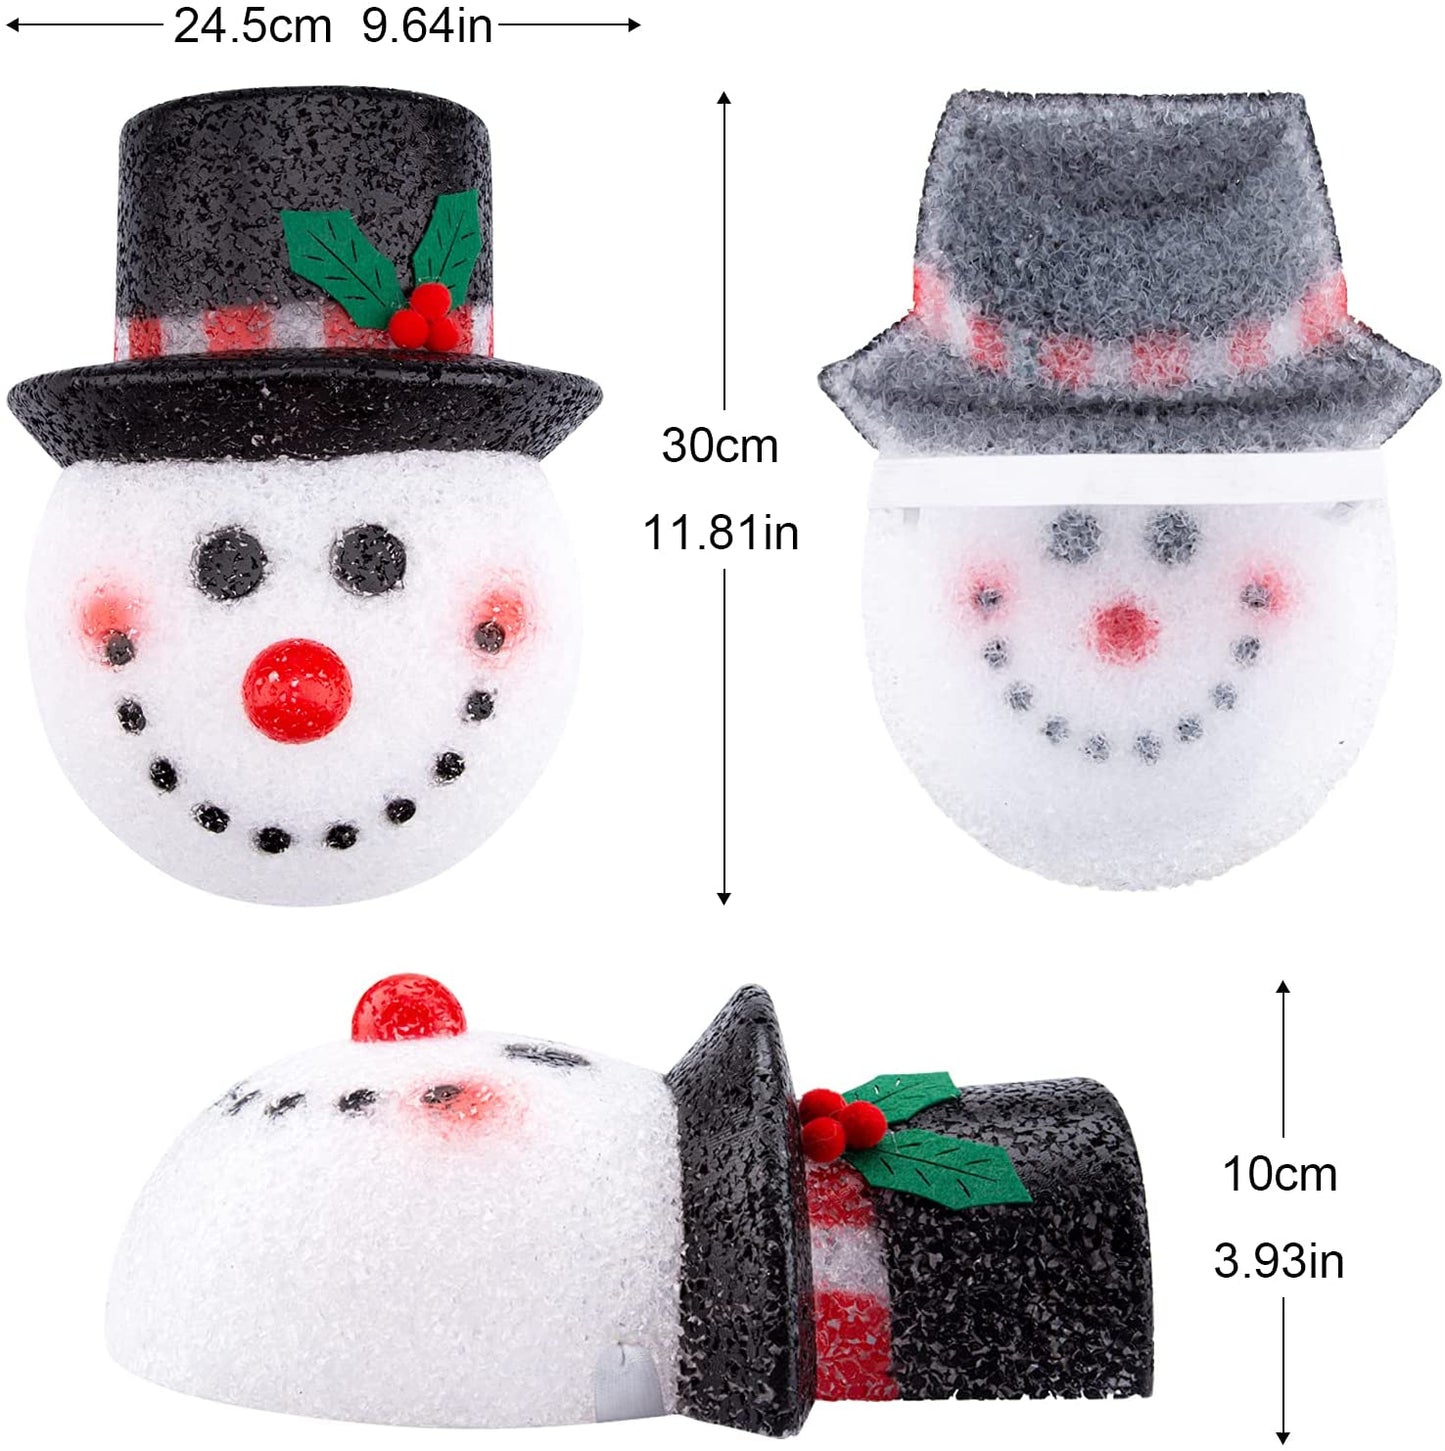 Snowman Porch Light Cover Two pack[BUY 3 FREE SHIPPING]